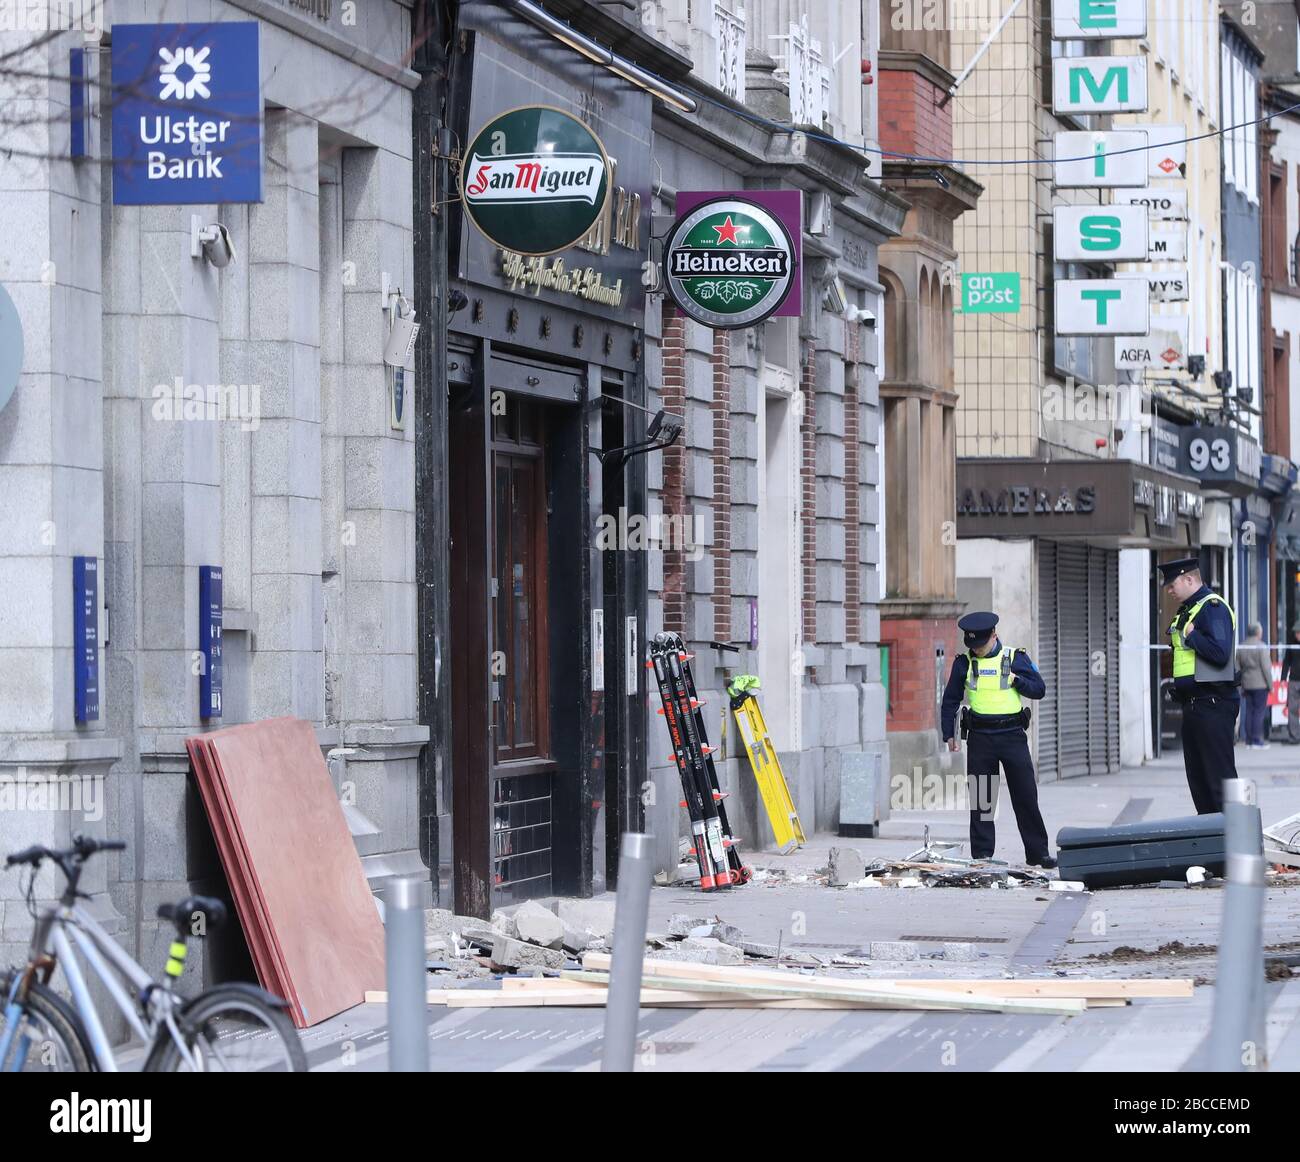 The scene at Clanbrassil street in Dundalk, Co Louth, where two ATM's where stolen in a late night raid. Stock Photo